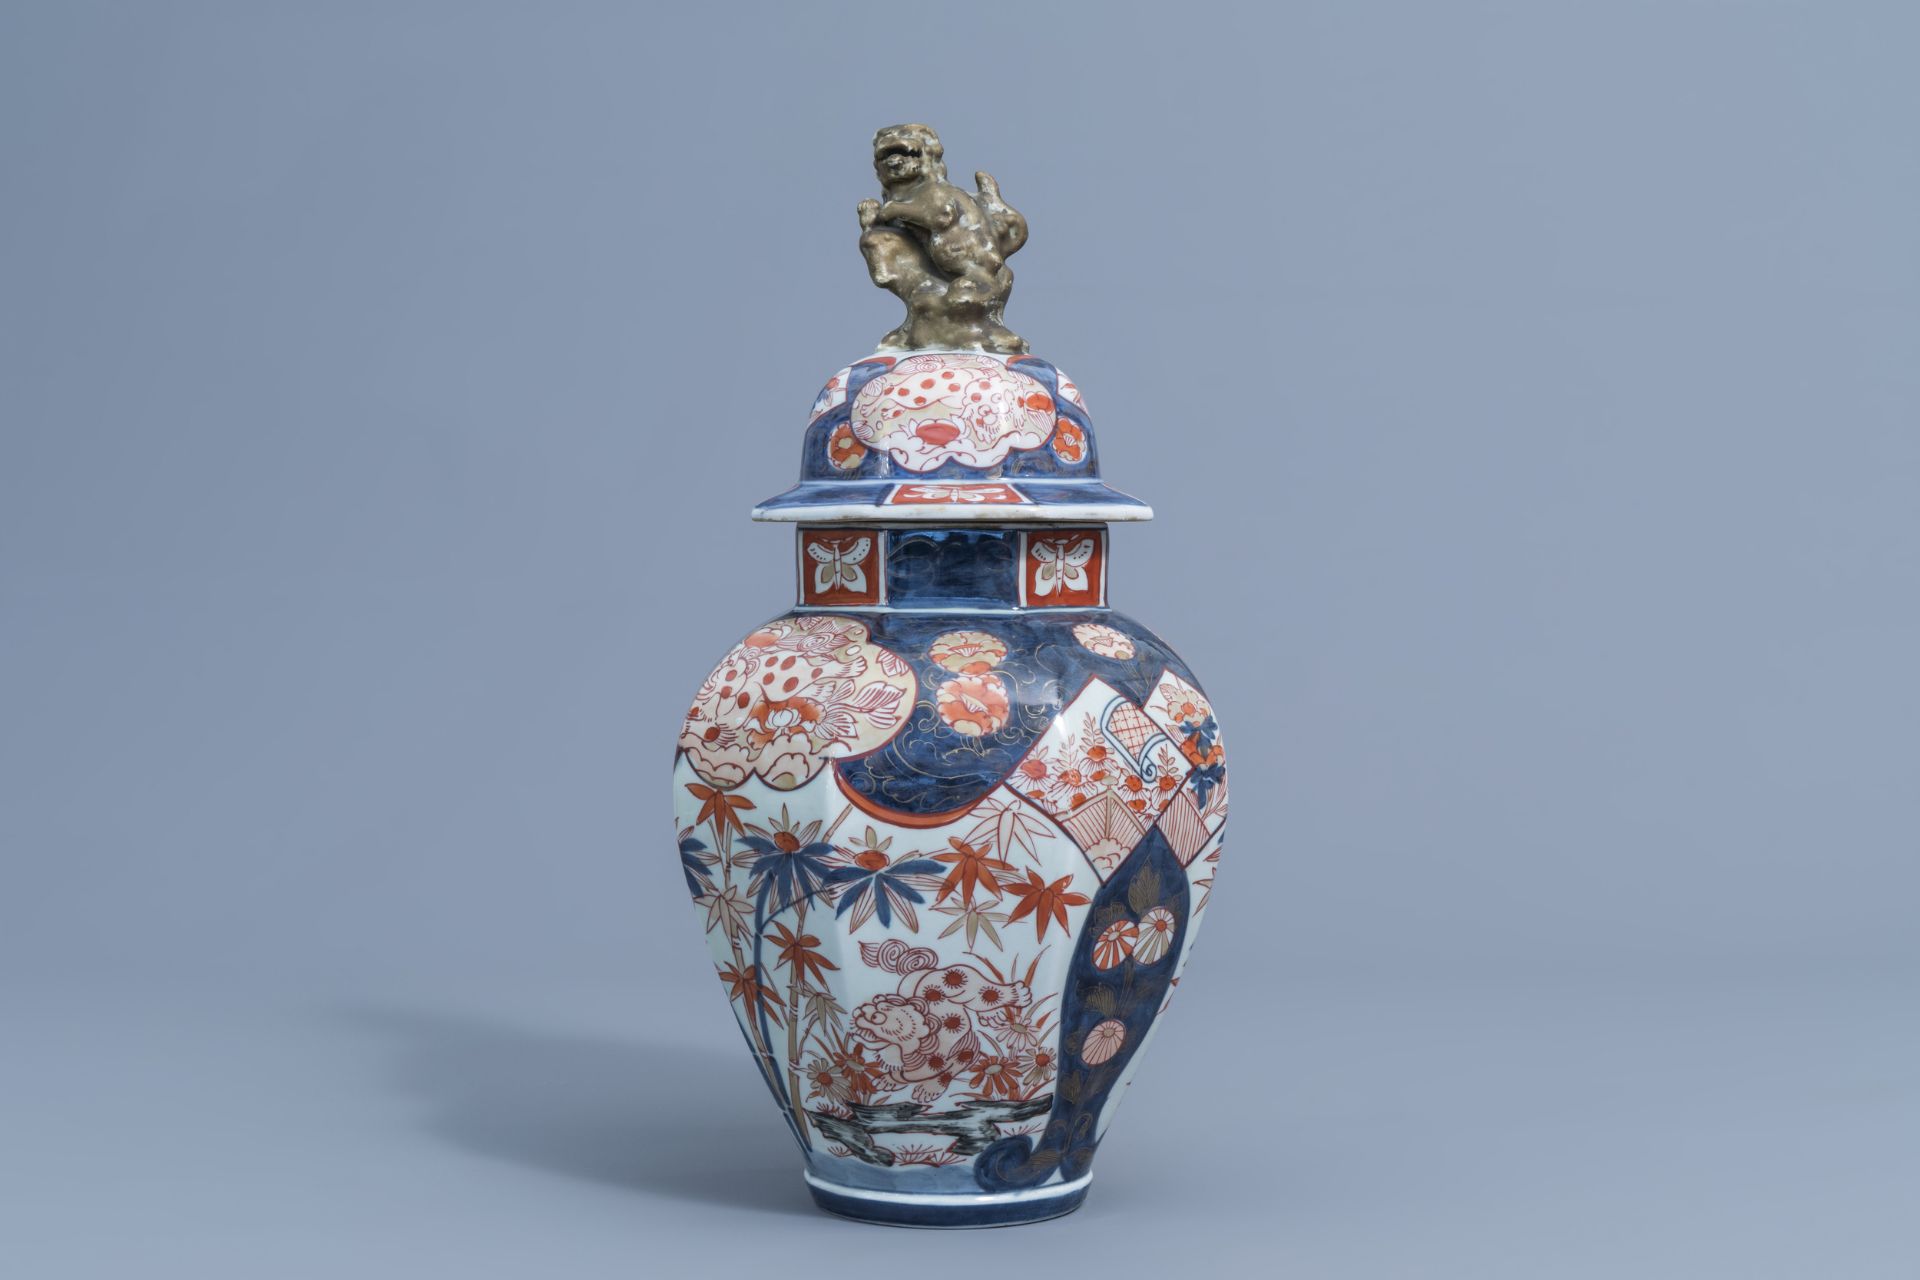 A Japanese Imari vase and cover and a pair of bronze stands with animals, Edo/Meiji, 18de/19de eeuw - Image 2 of 13